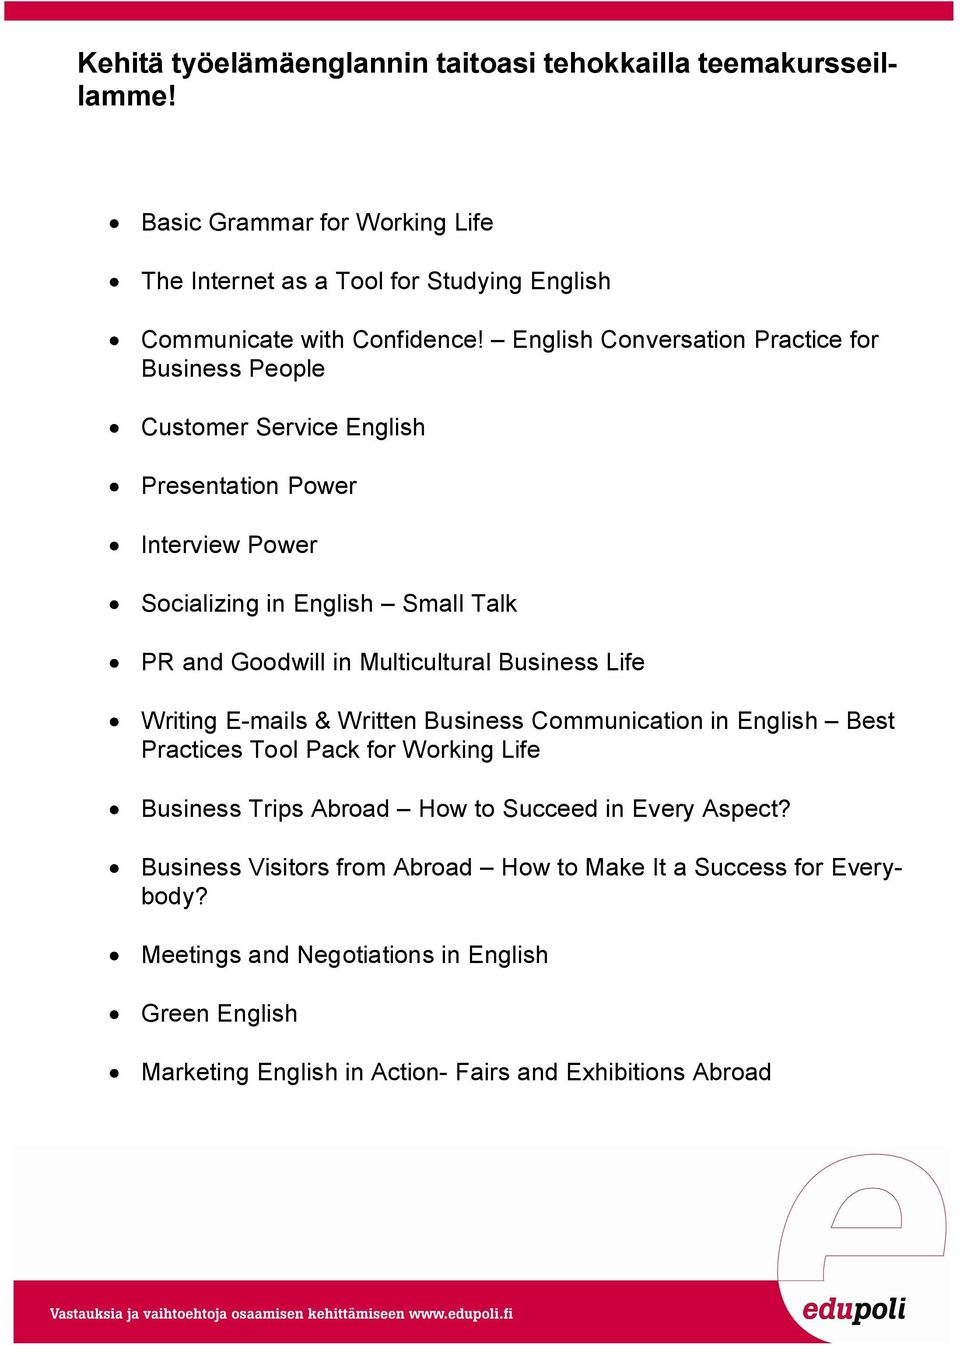 Multicultural Business Life Writing E-mails & Written Business Communication in English Best Practices Tool Pack for Working Life Business Trips Abroad How to Succeed in